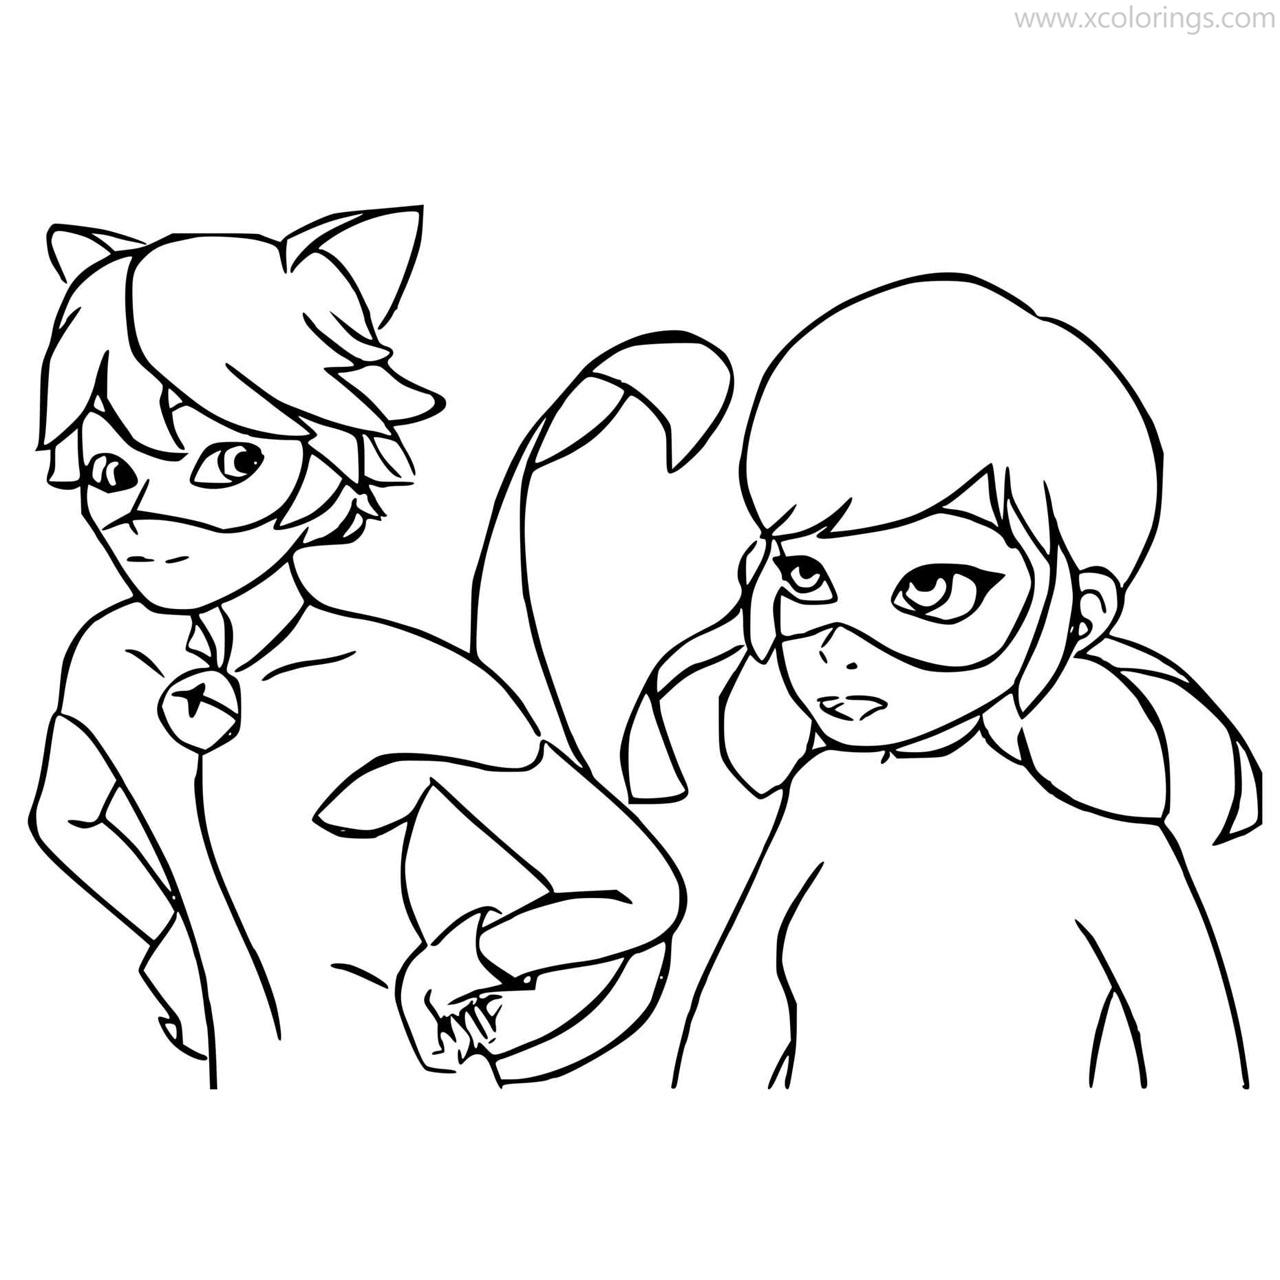 Free Miraculous Ladybug And Cat Noirs Coloring Pages Black and White printable